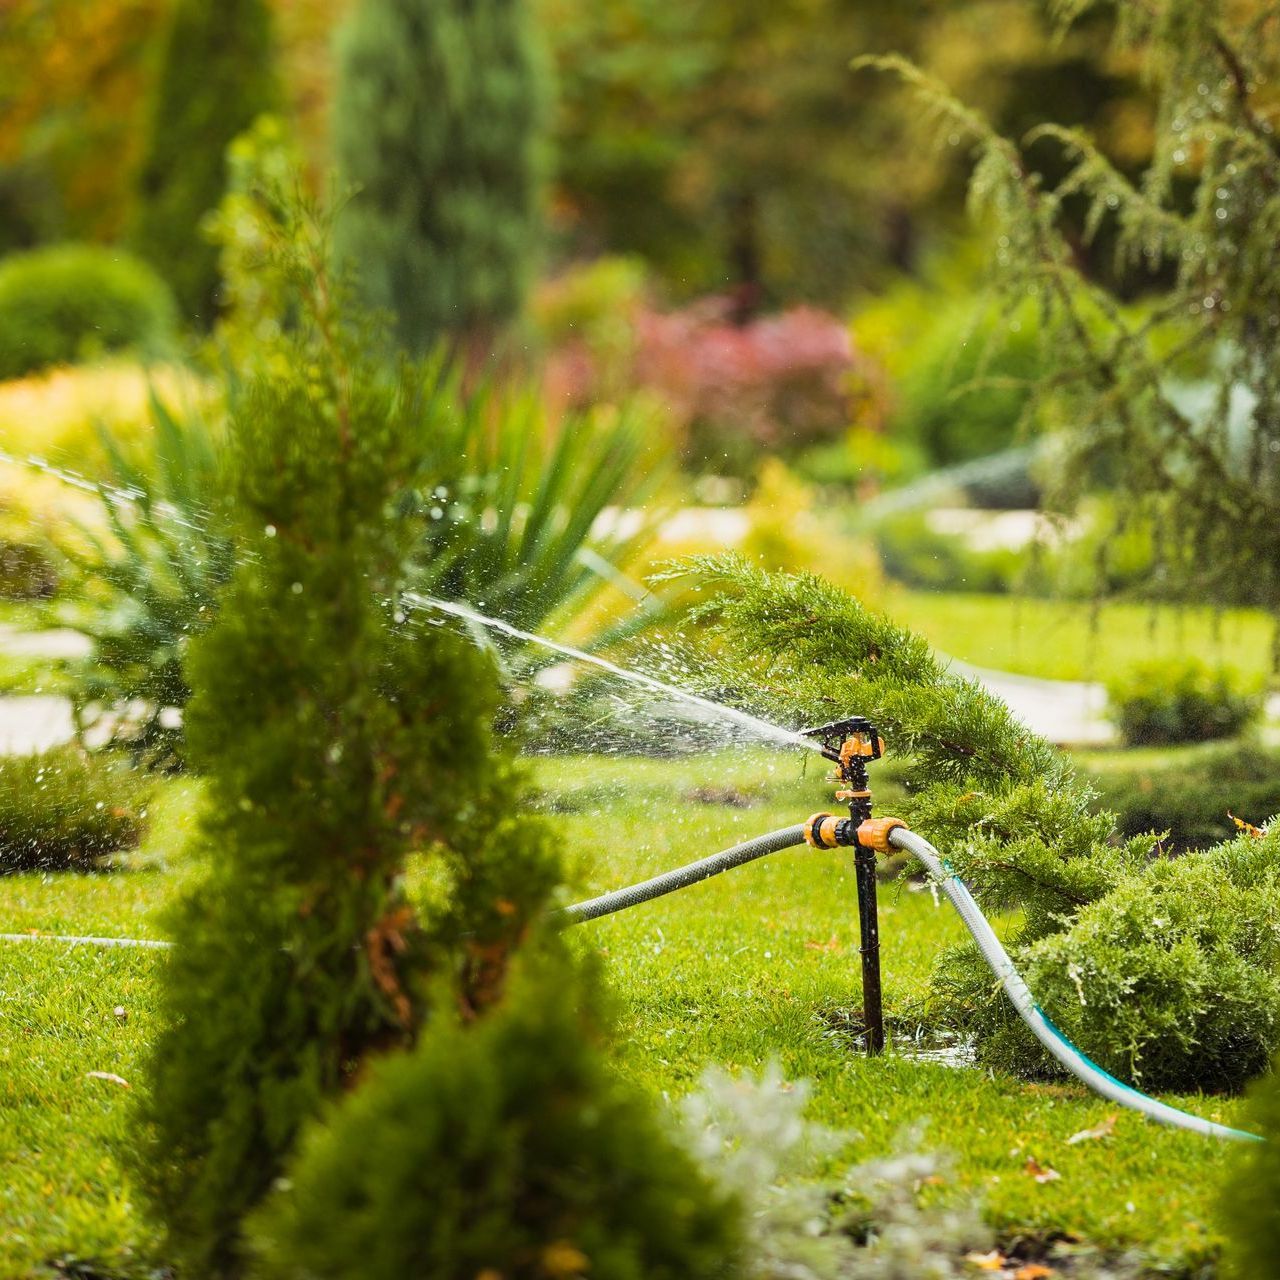 a hose is connected to a sprinkler in a garden .